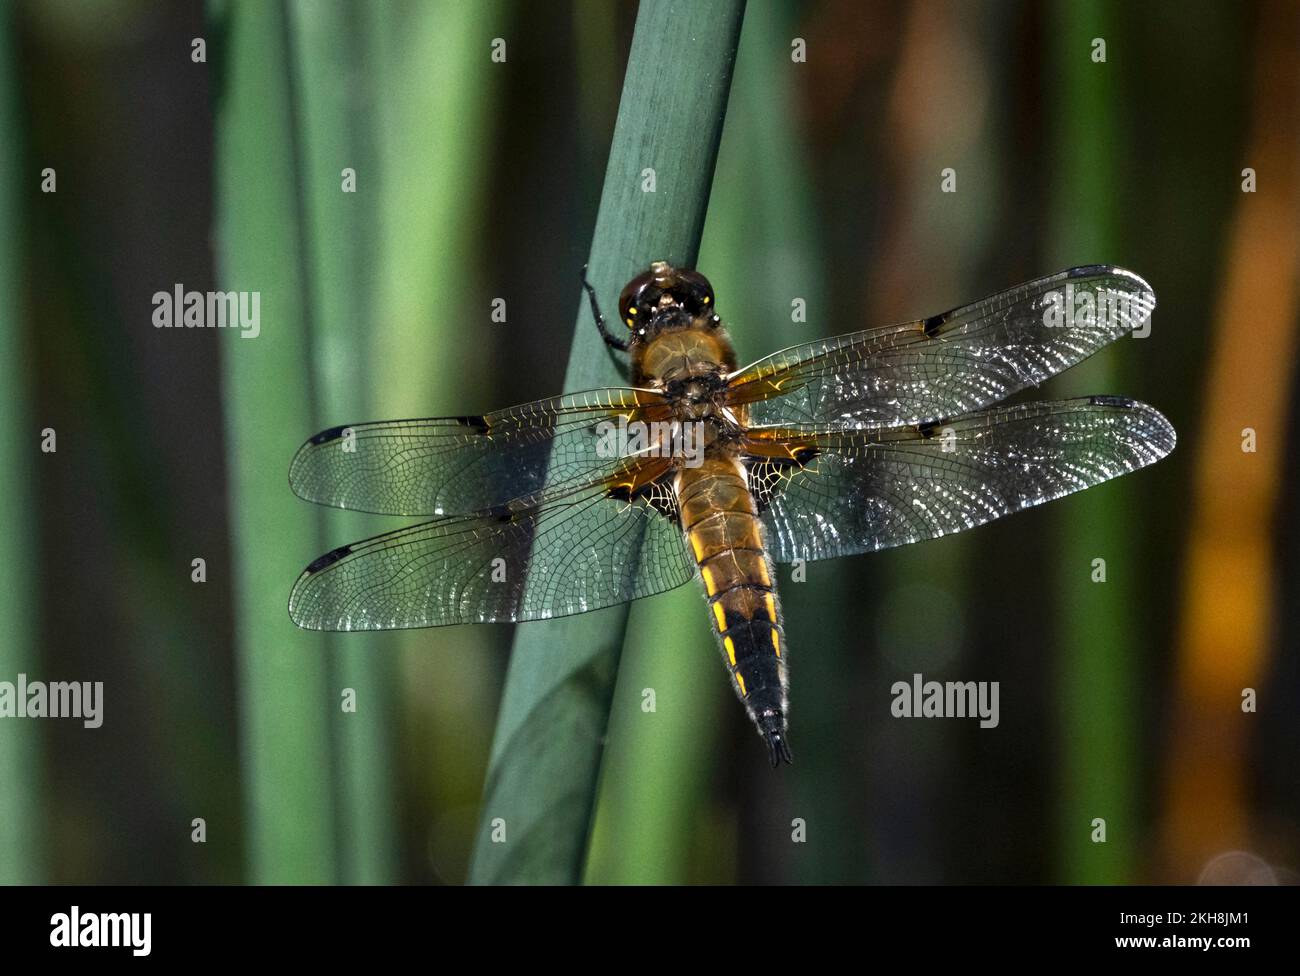 Four Spotted Chaser Dragonfly (Libellula quadrimaculata), Anderton nature Reserve, Cheshire, England, UK Stock Photo